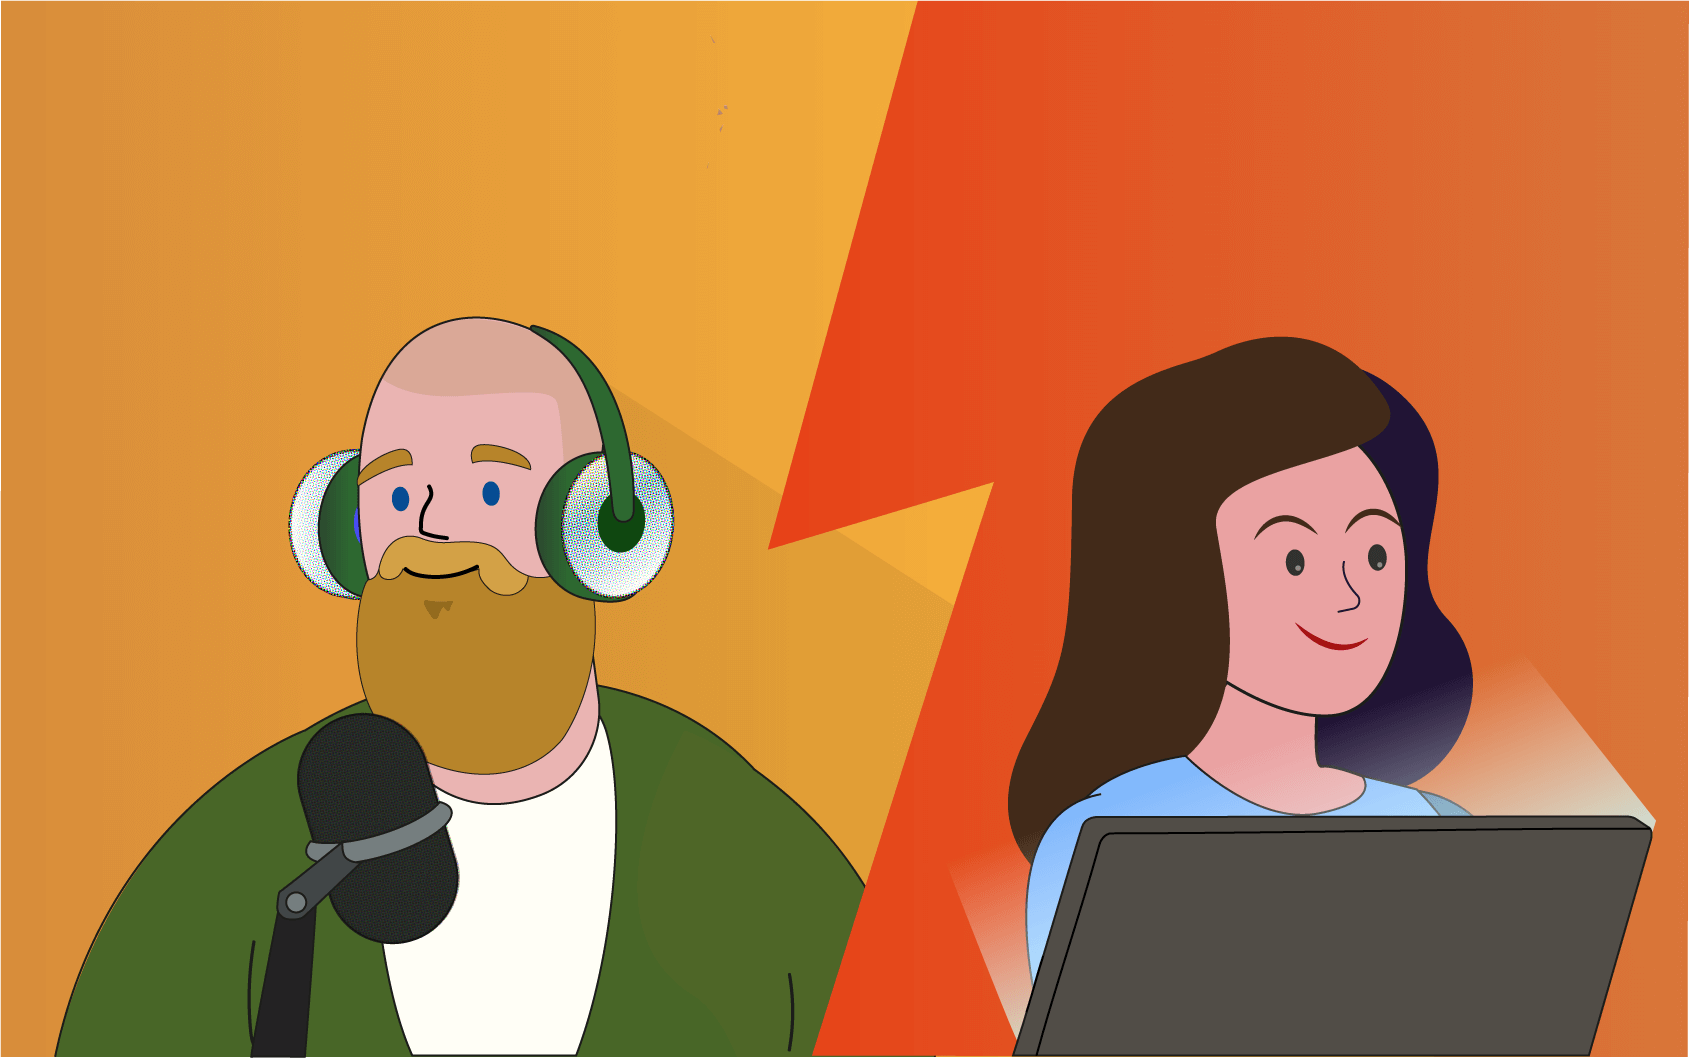 Evaluating the Costs-Blogs vs. Podcasts